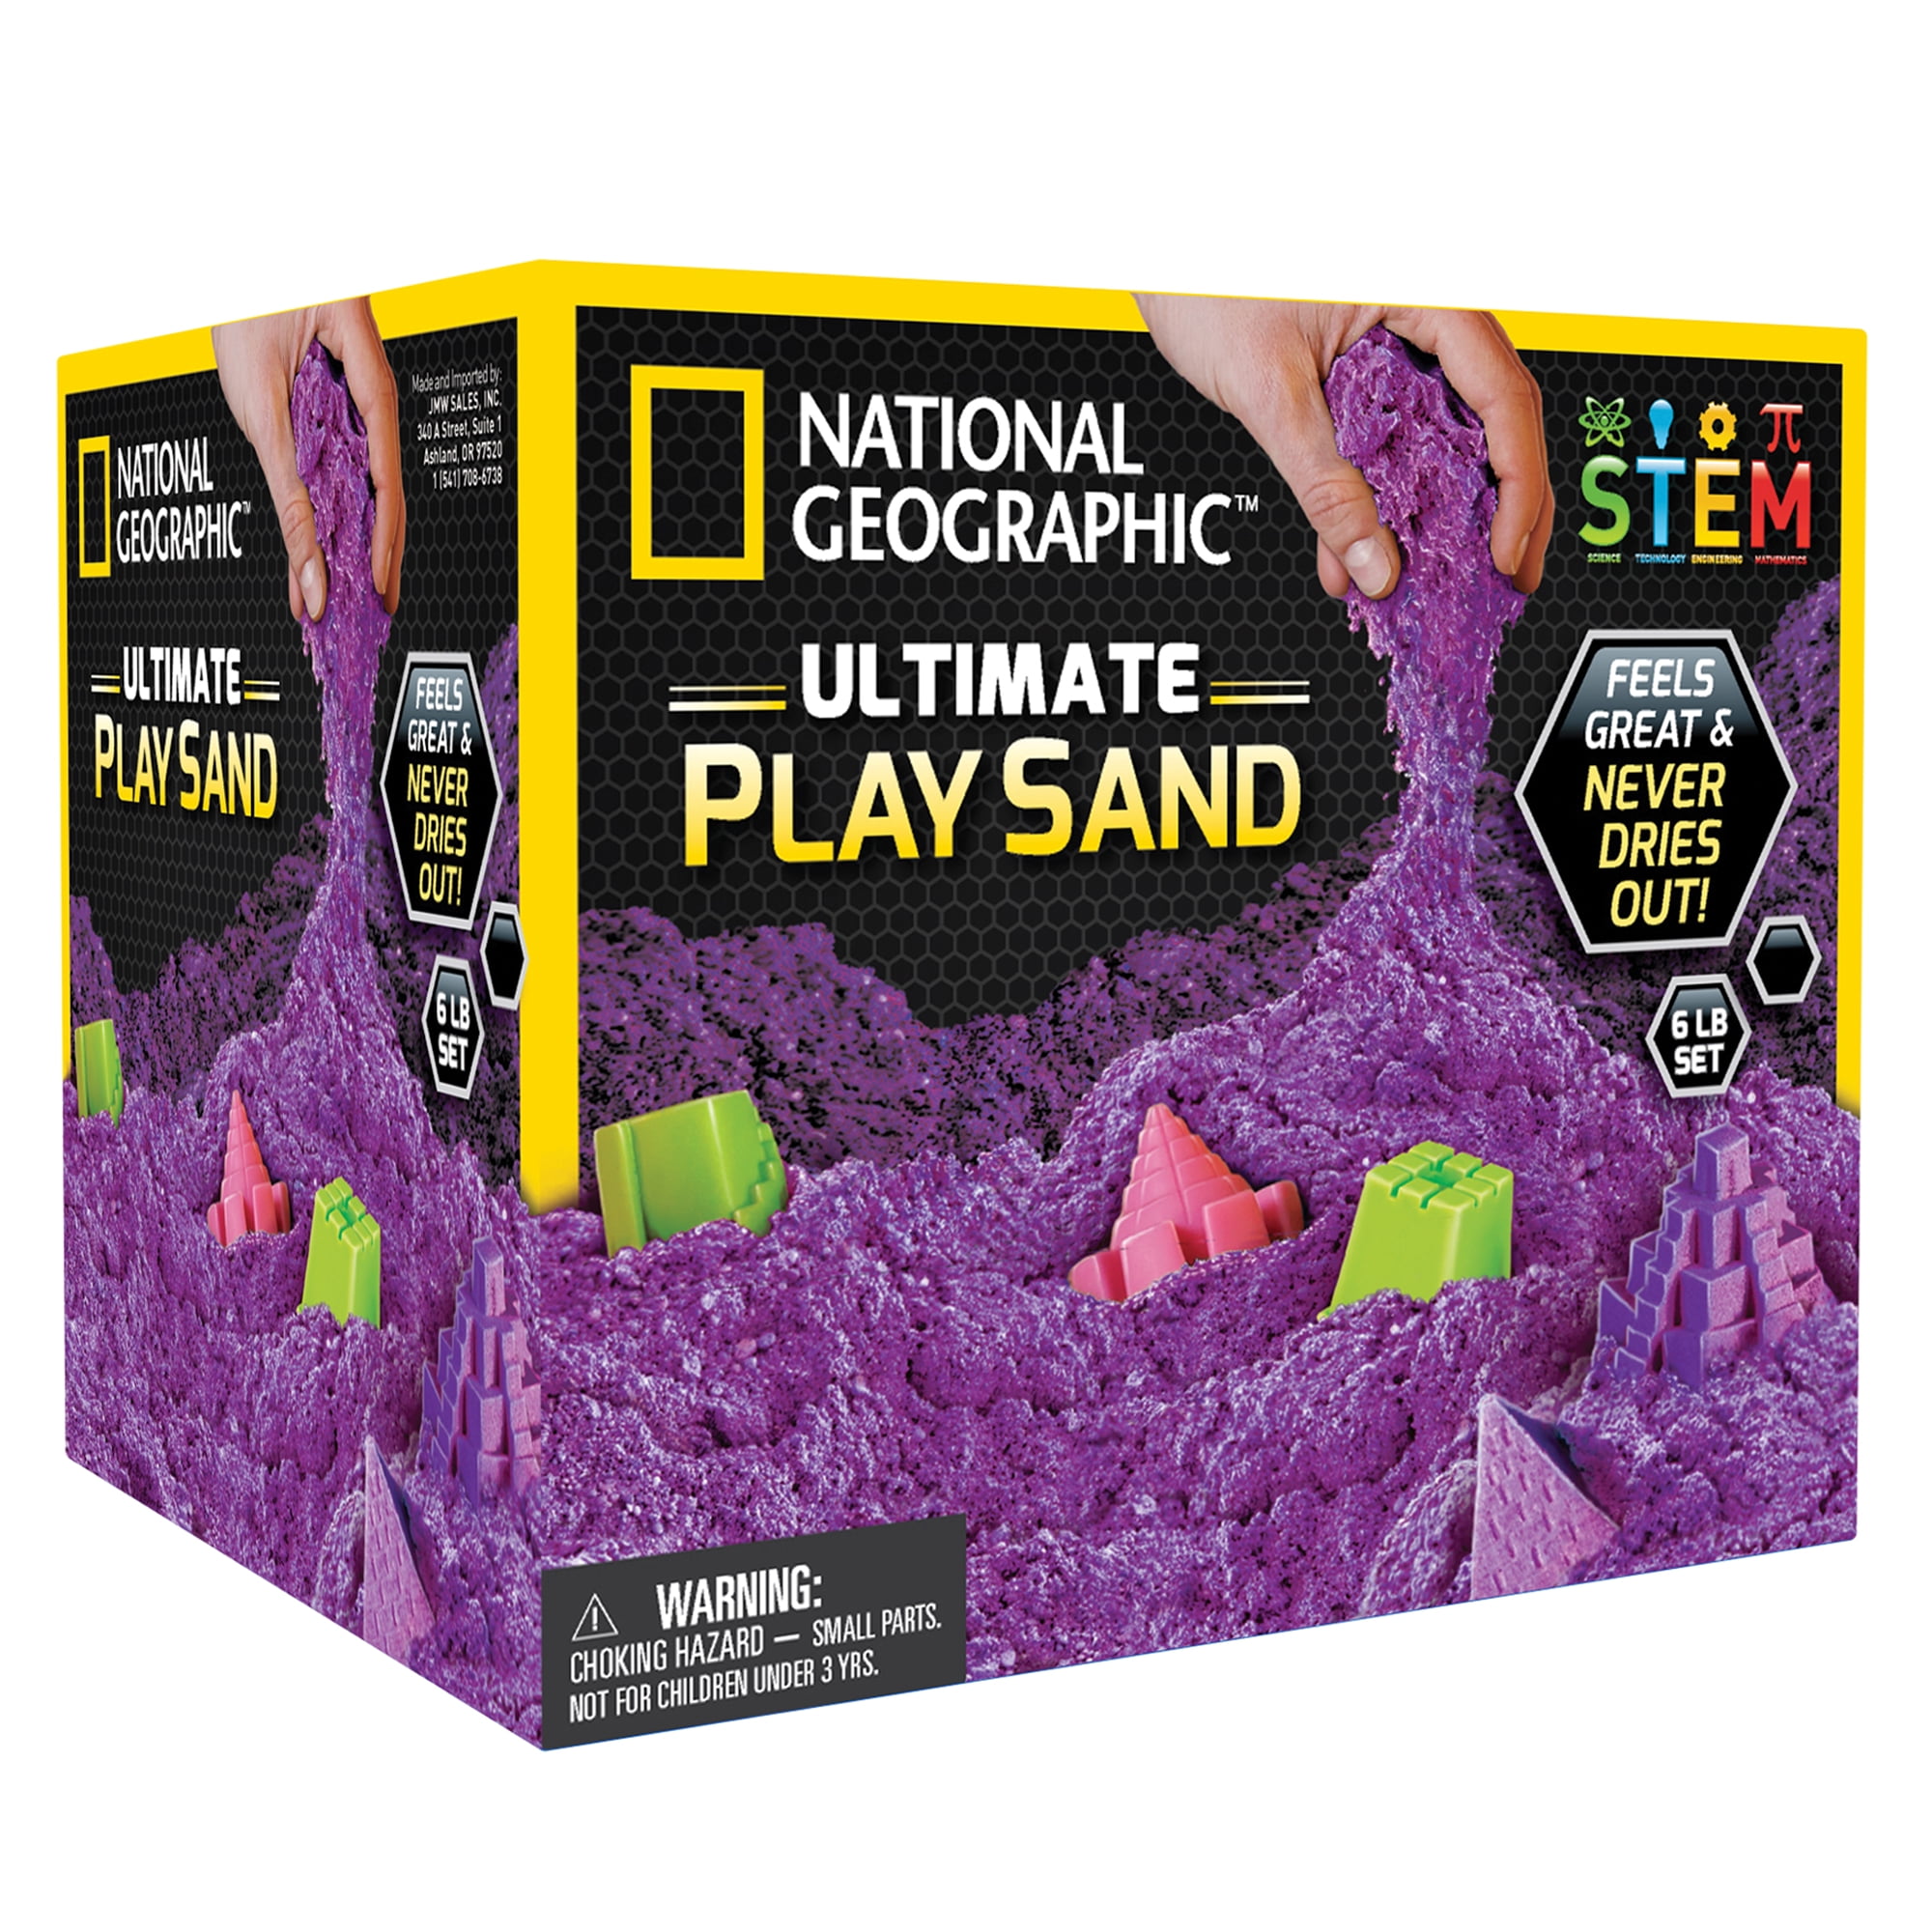 National Geographic NATIONAL GEOGRAPHIC Play Sand Combo Pack - 2 LBS each  of Blue, Purple and Natural Sand with Castle Molds - A Kinetic Sensory